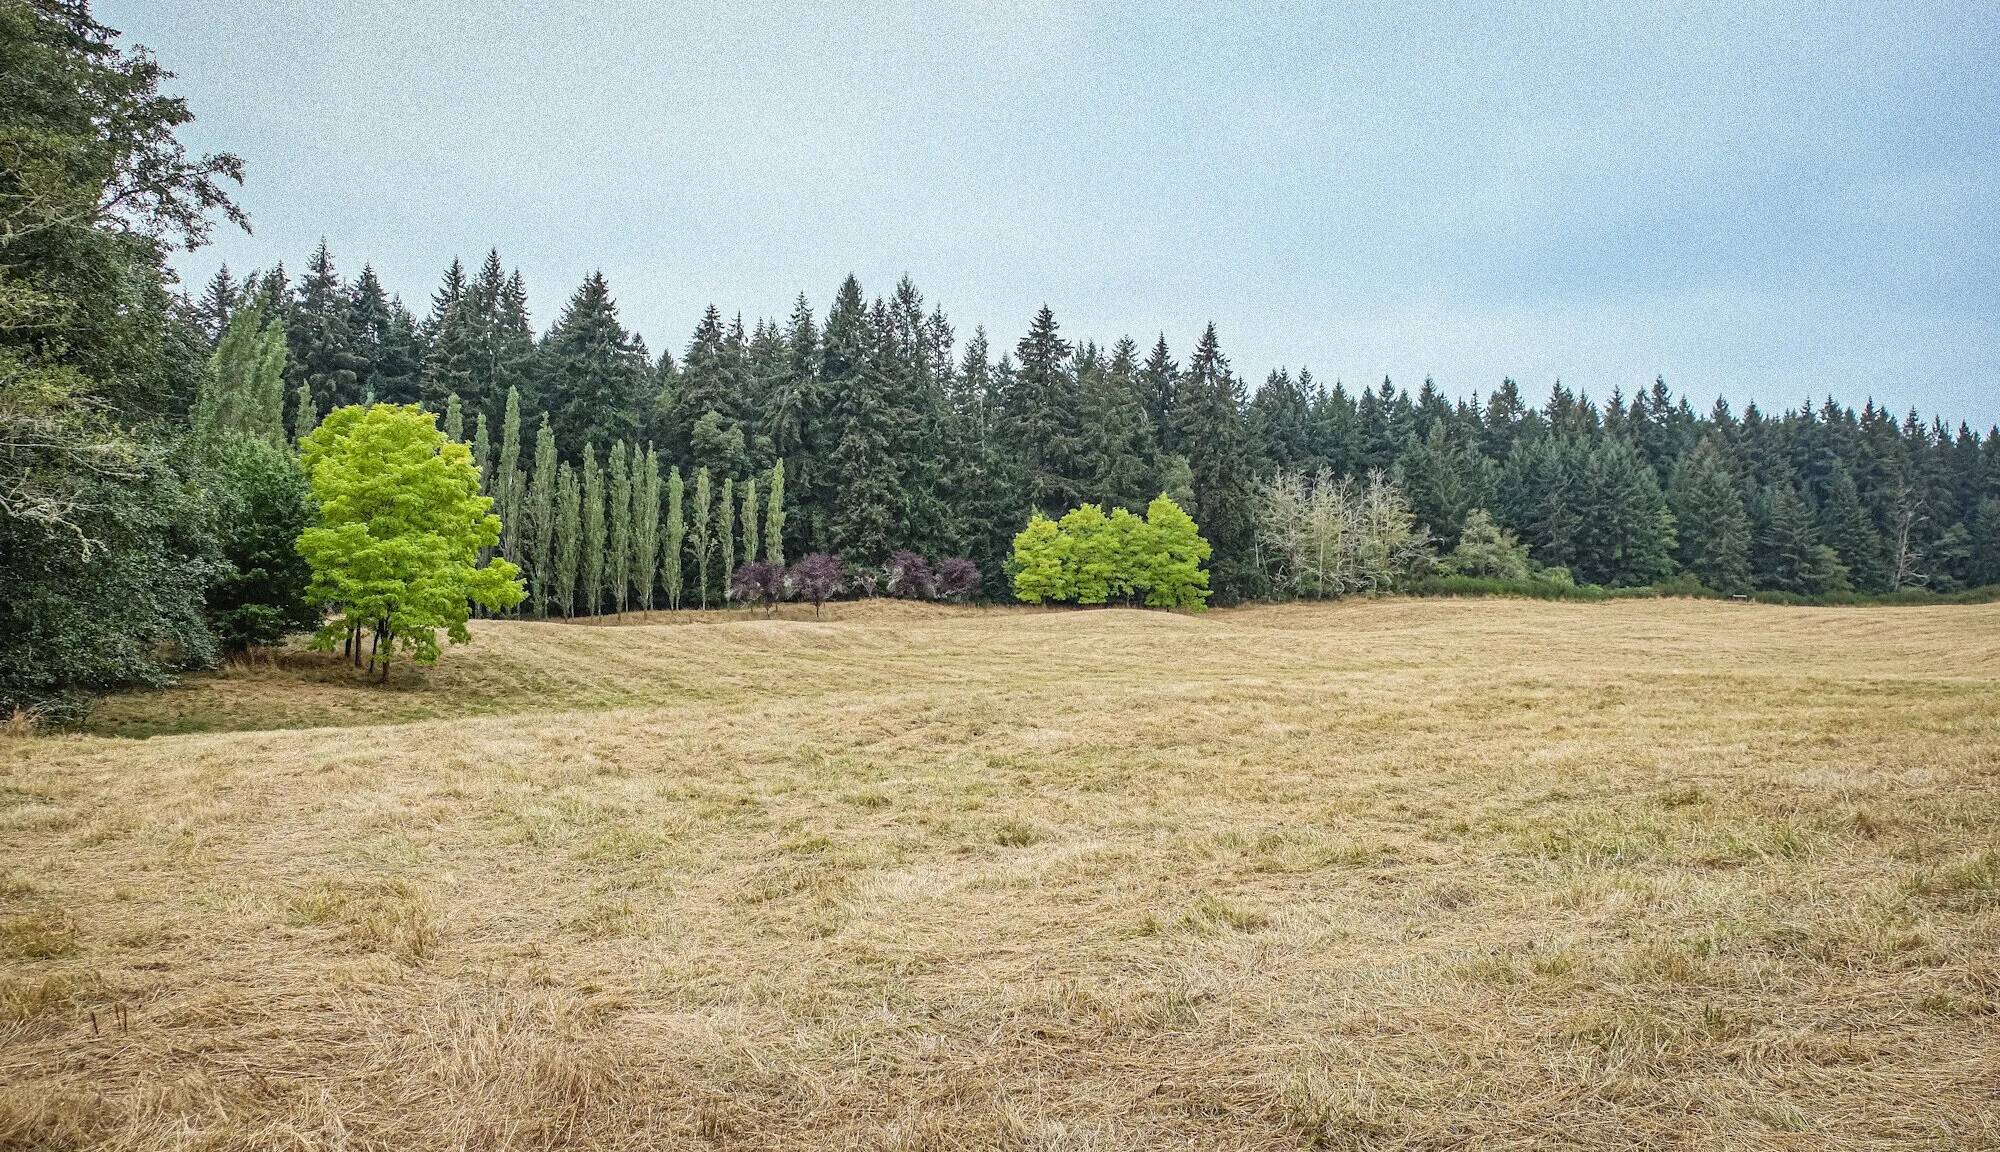 Wax Orchard consists of 110 acres near the center of Vashon Island. King County Parks photo.